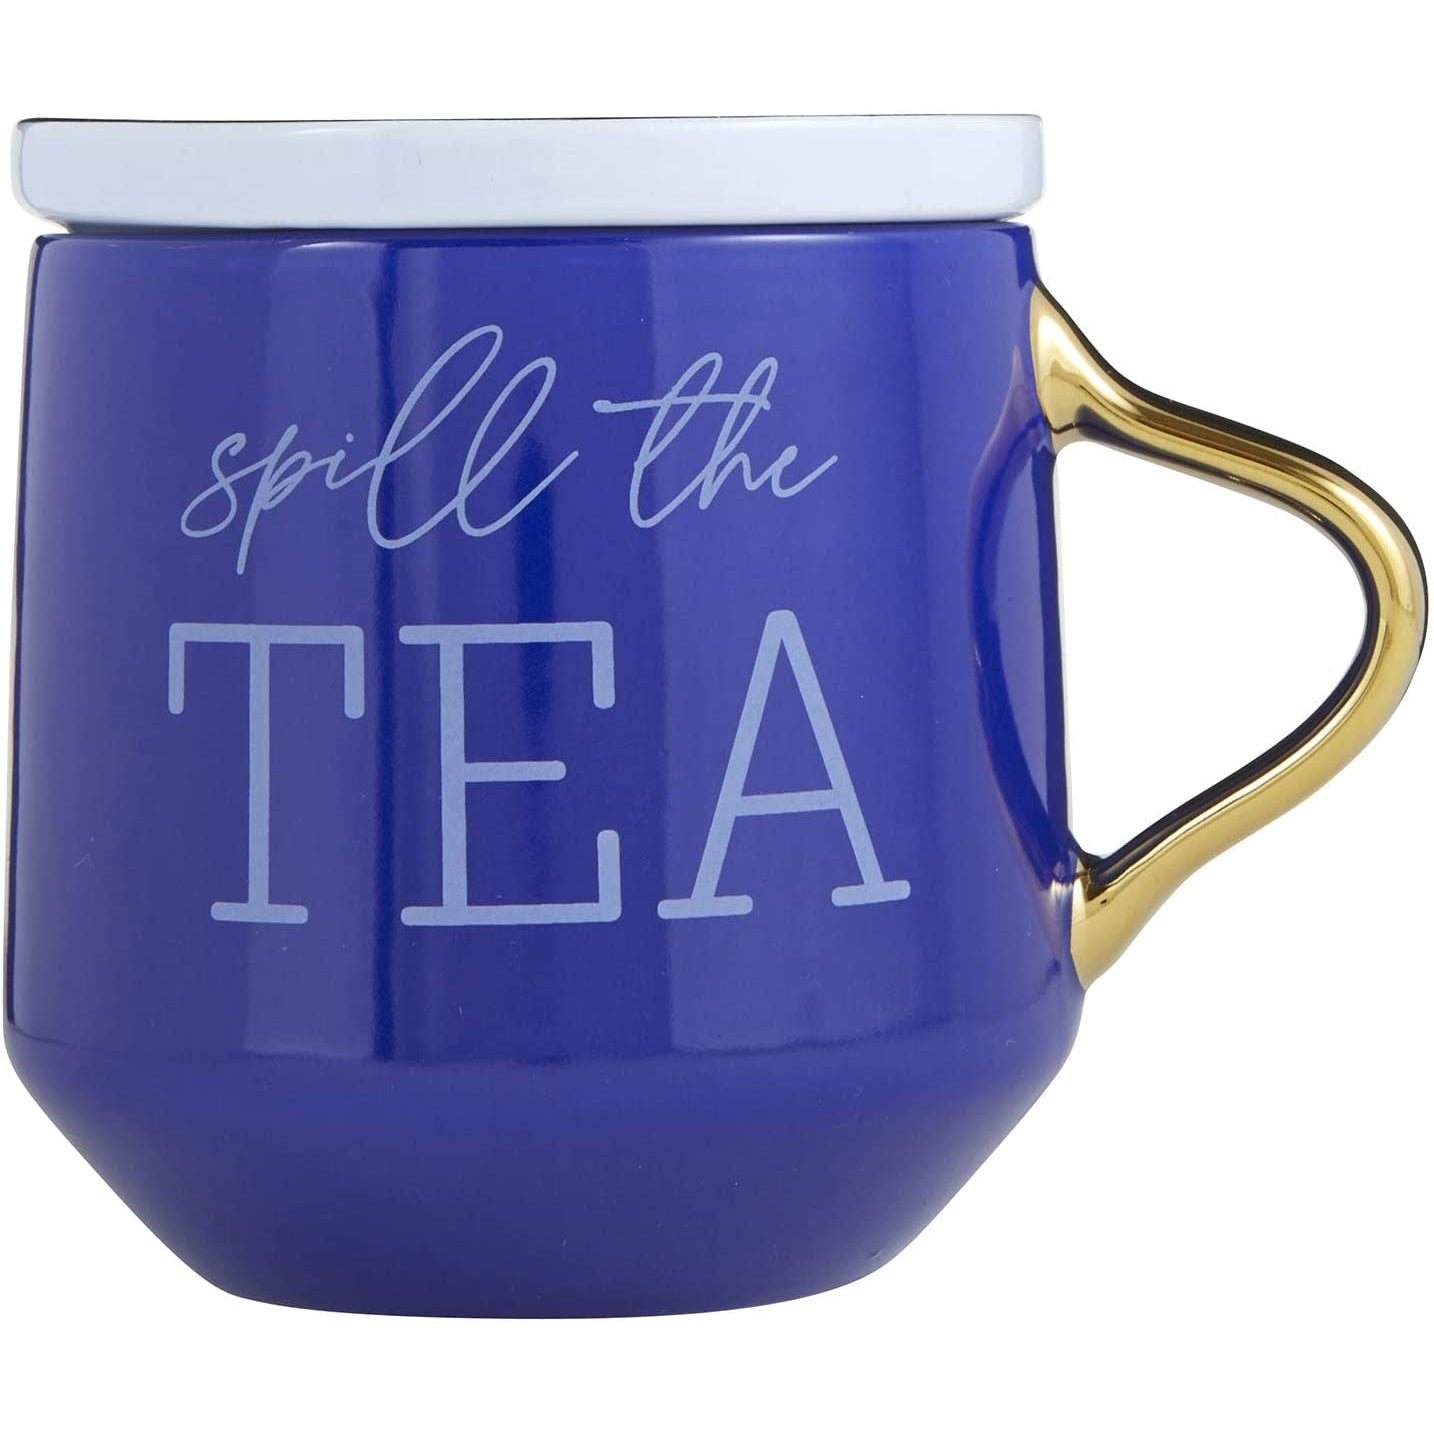 Spill the Tea Mug & Coaster Lid in Blue and Gold